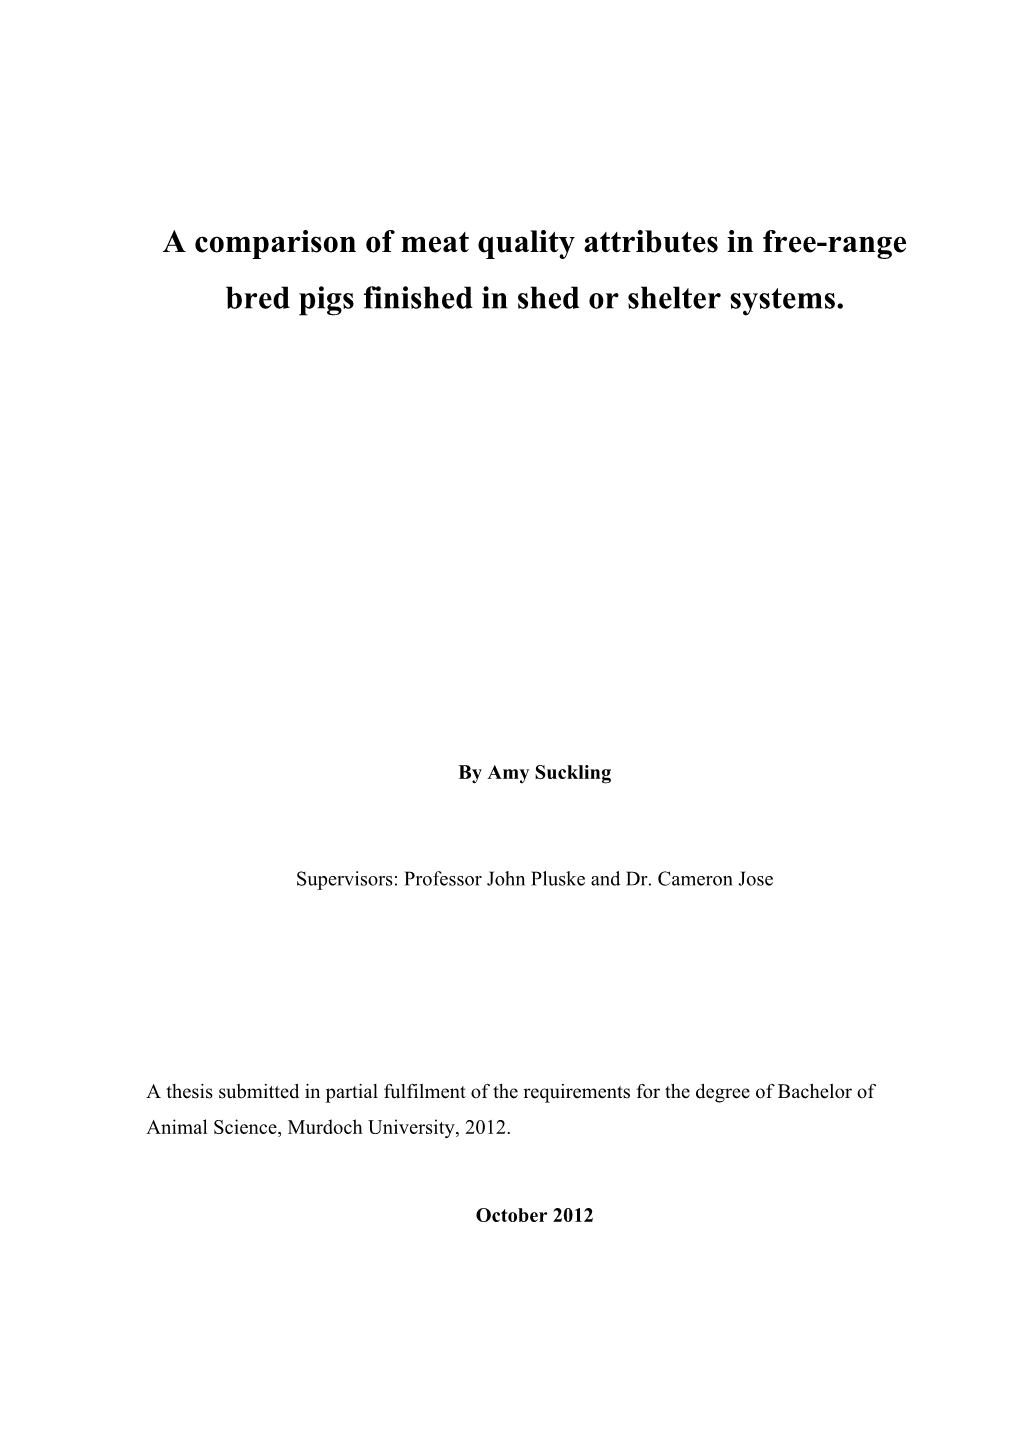 A Comparison of Meat Quality Attributes in Free-Range Bred Pigs Finished in Shed Or Shelter Systems